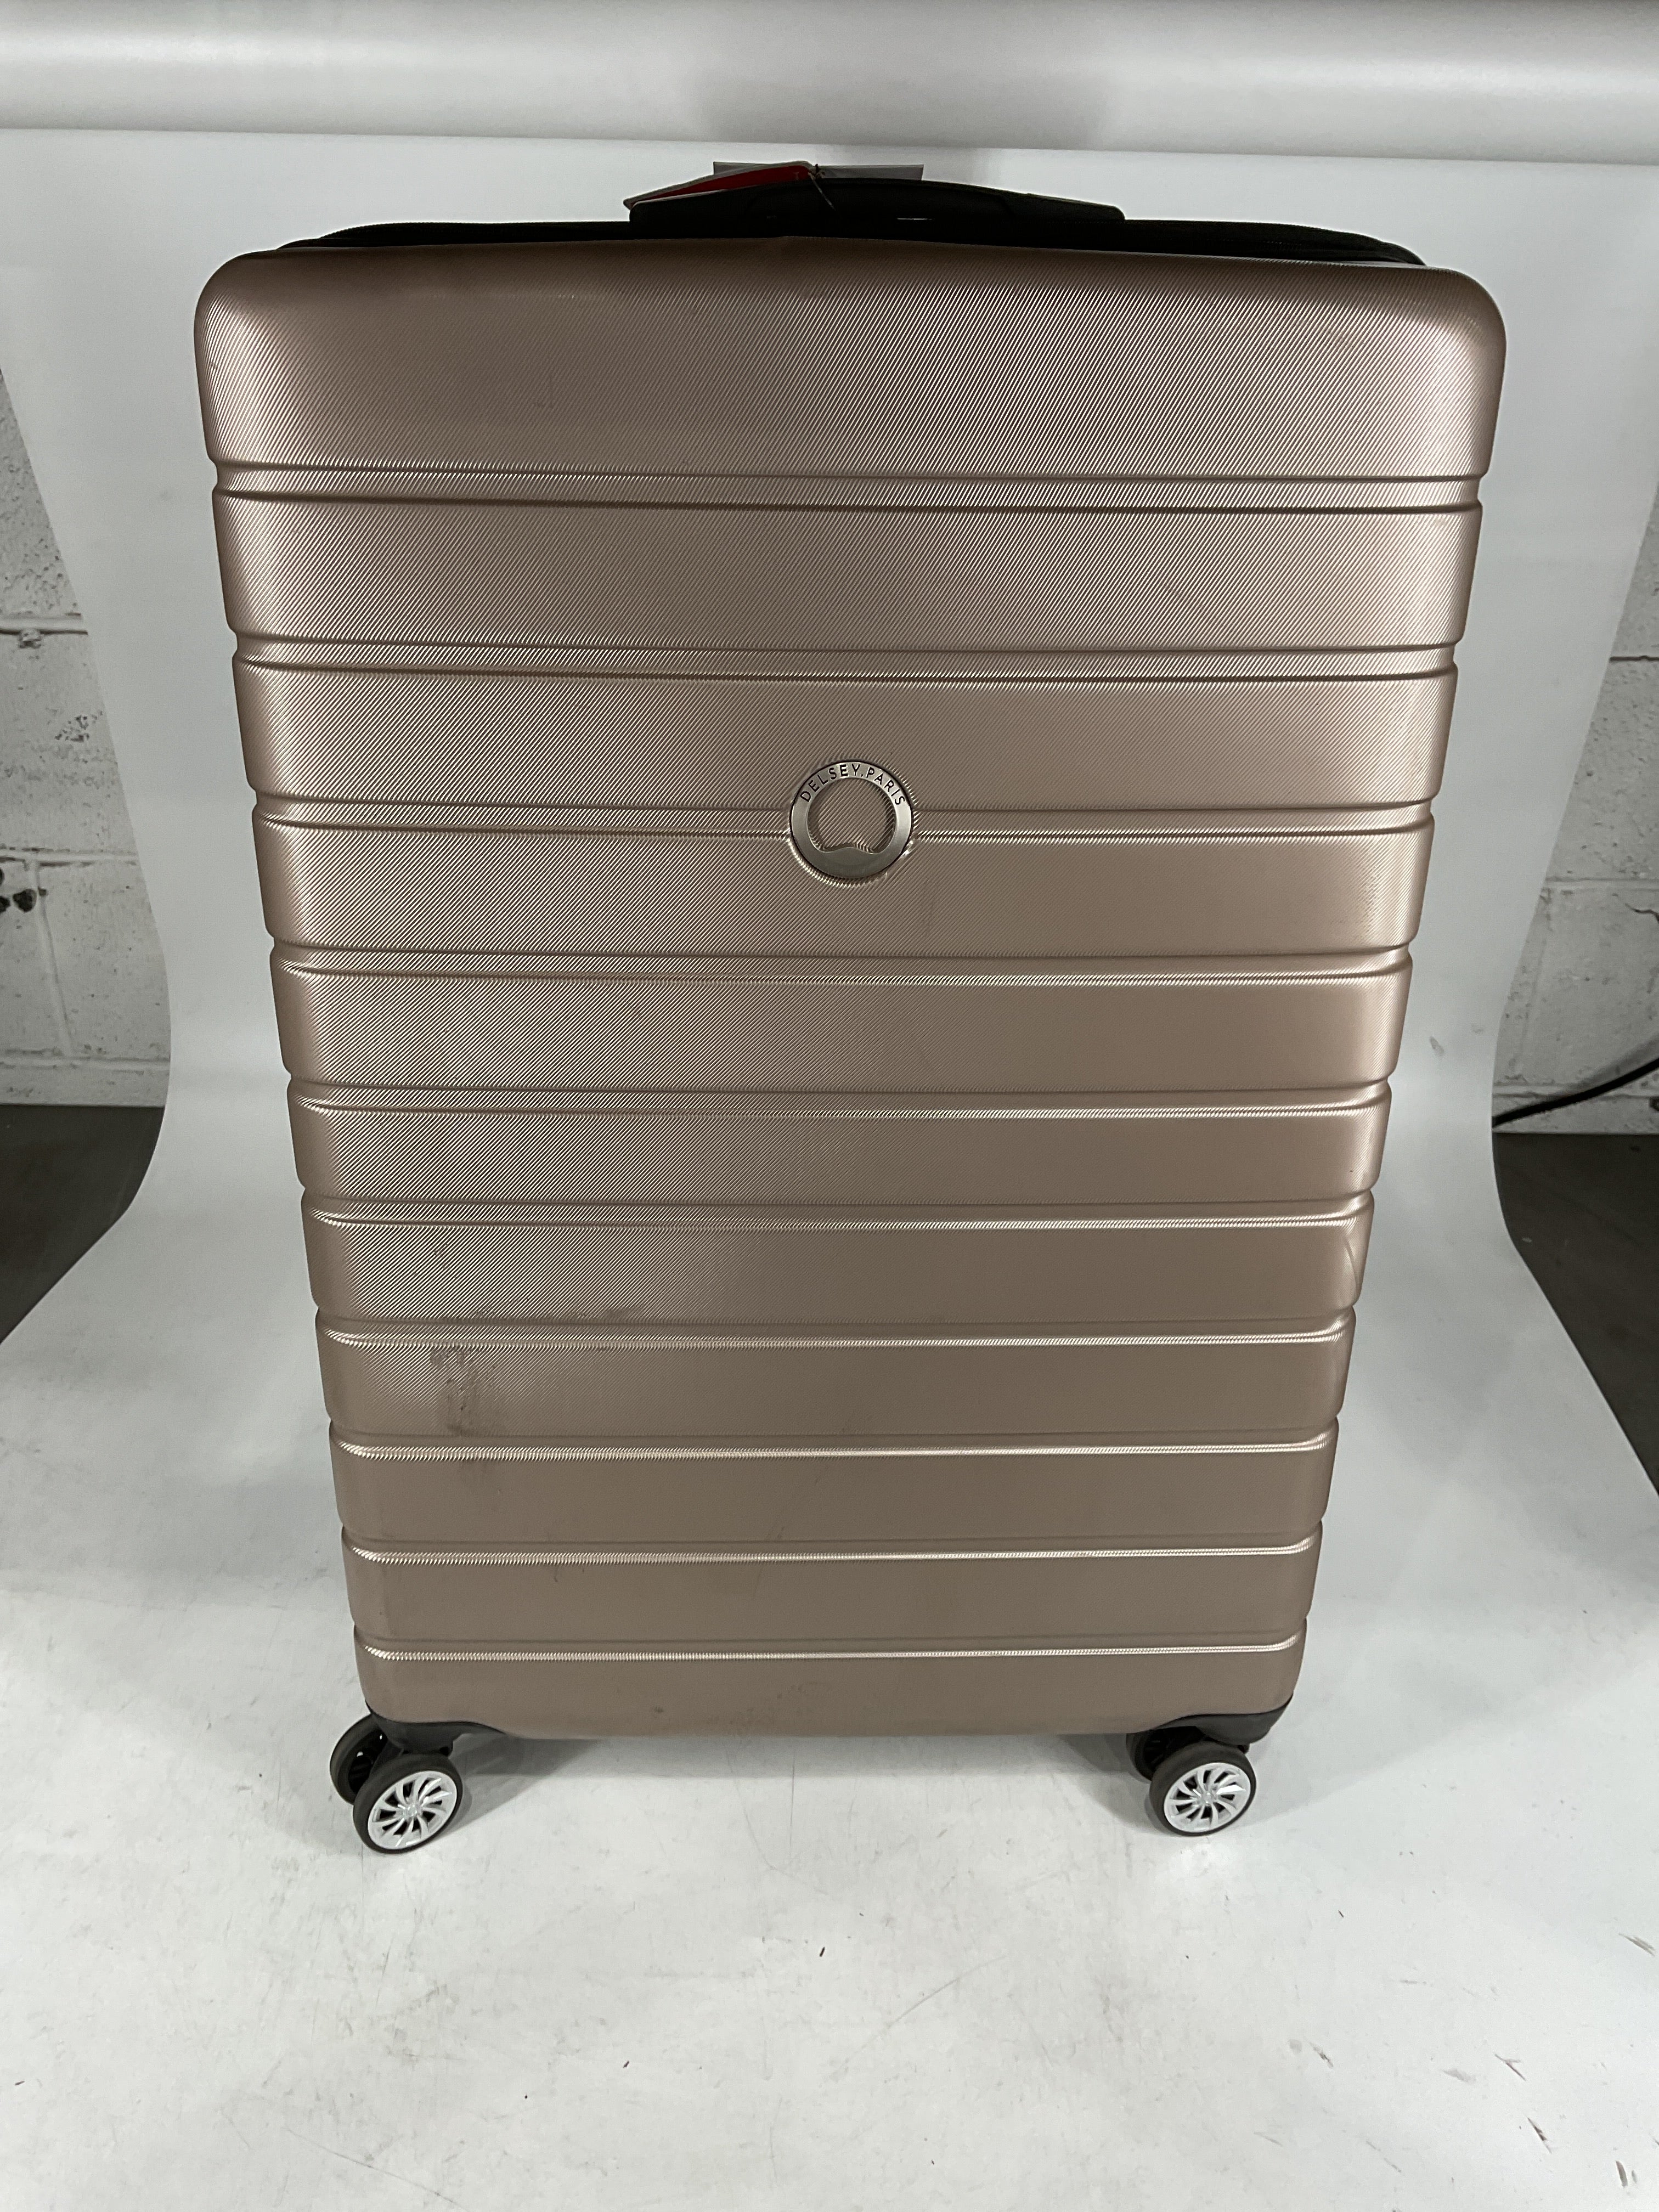 DELSEY Paris Jessica Hardside Expandable Luggage with Spinner Wheels U1